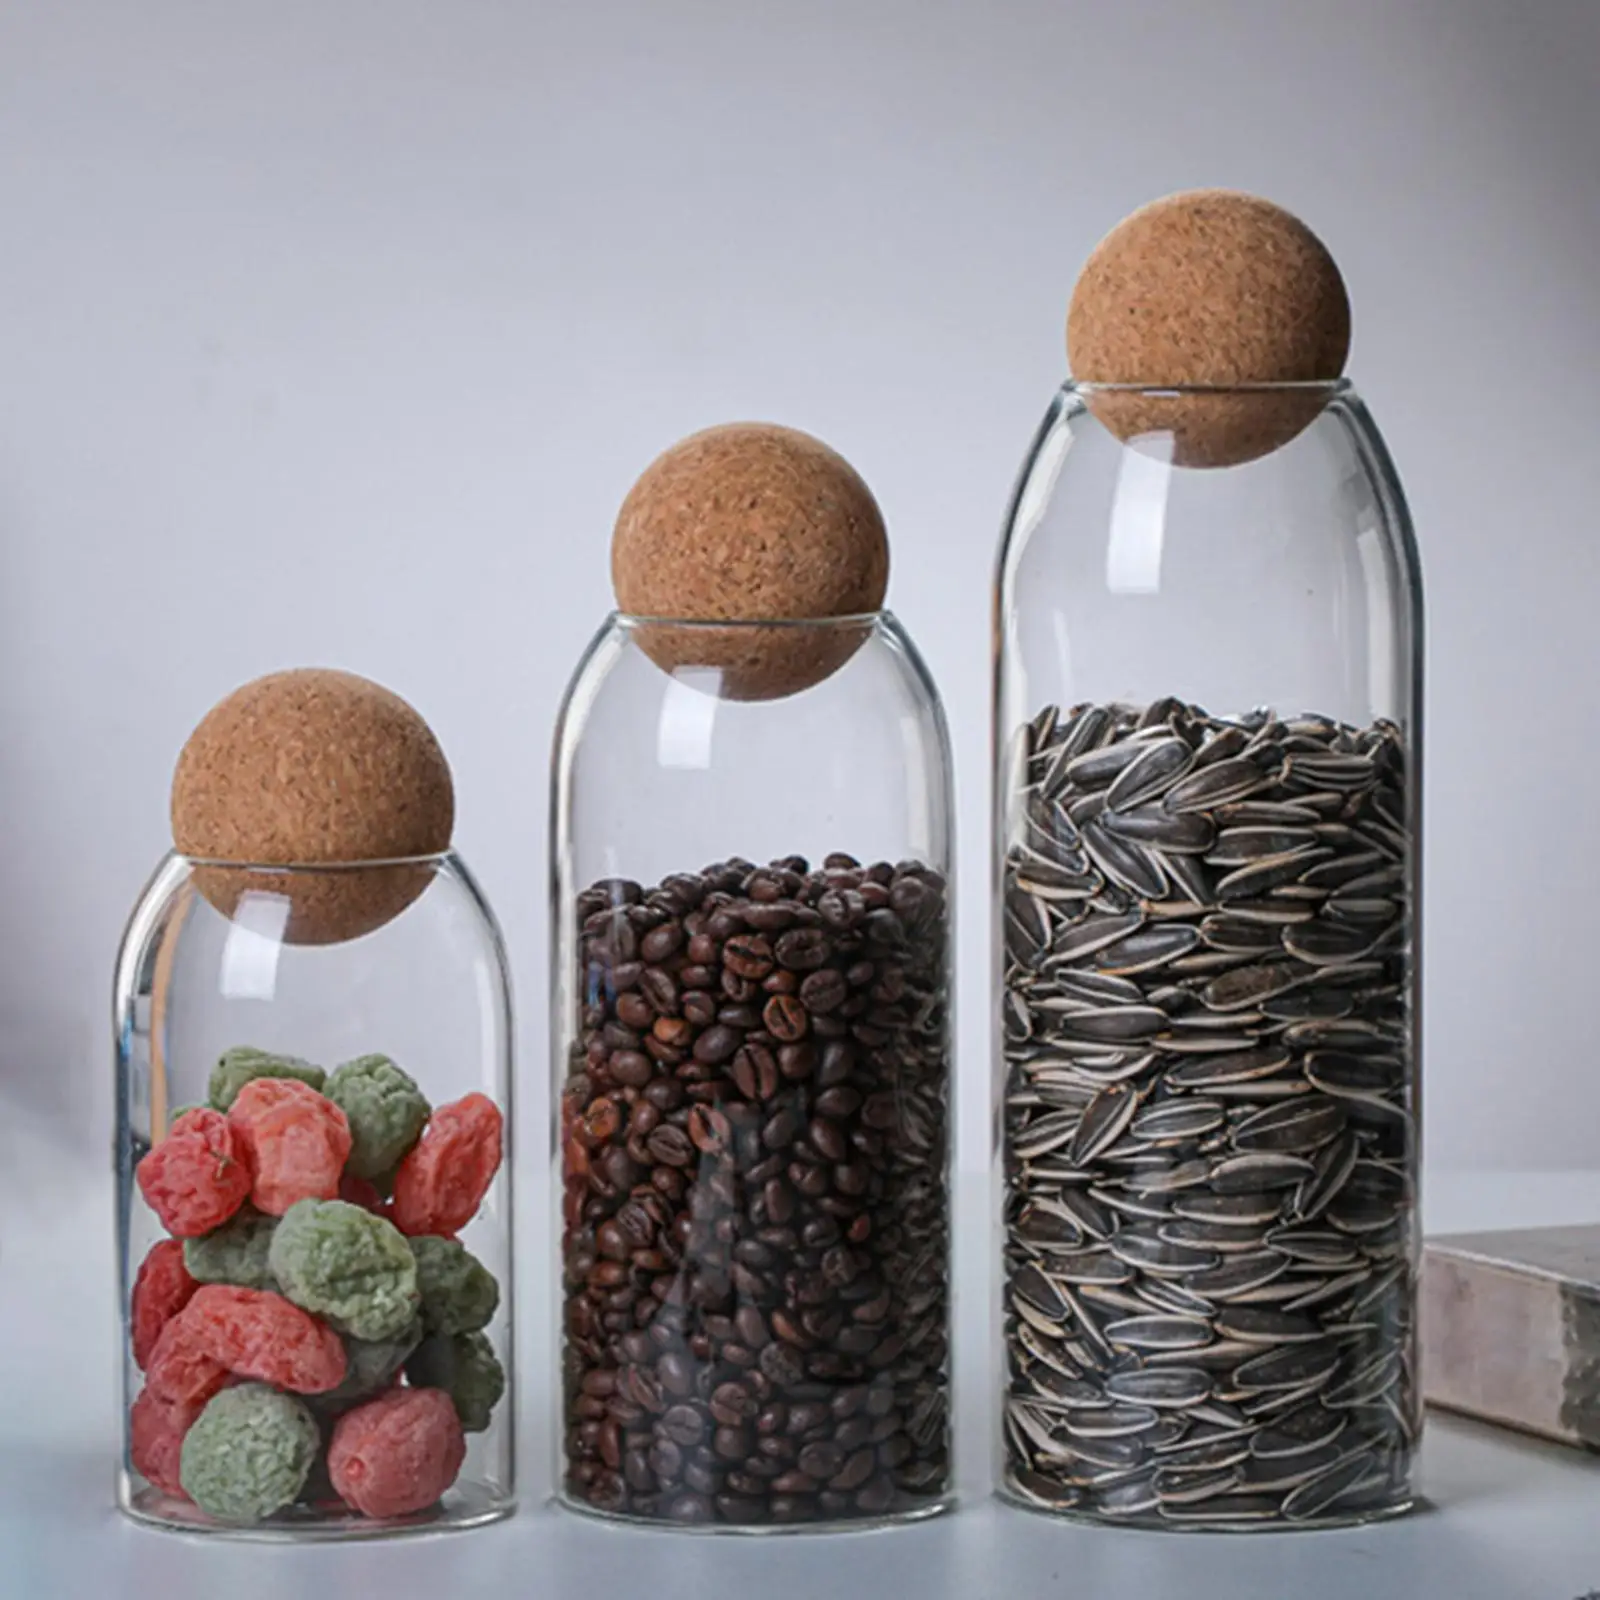 3 Pieces Transparent Storage Bottle Jars Cork Lid Organizer Container Cans Houseware Cylinder for Tea Sugar Pasta Coffee Cereal